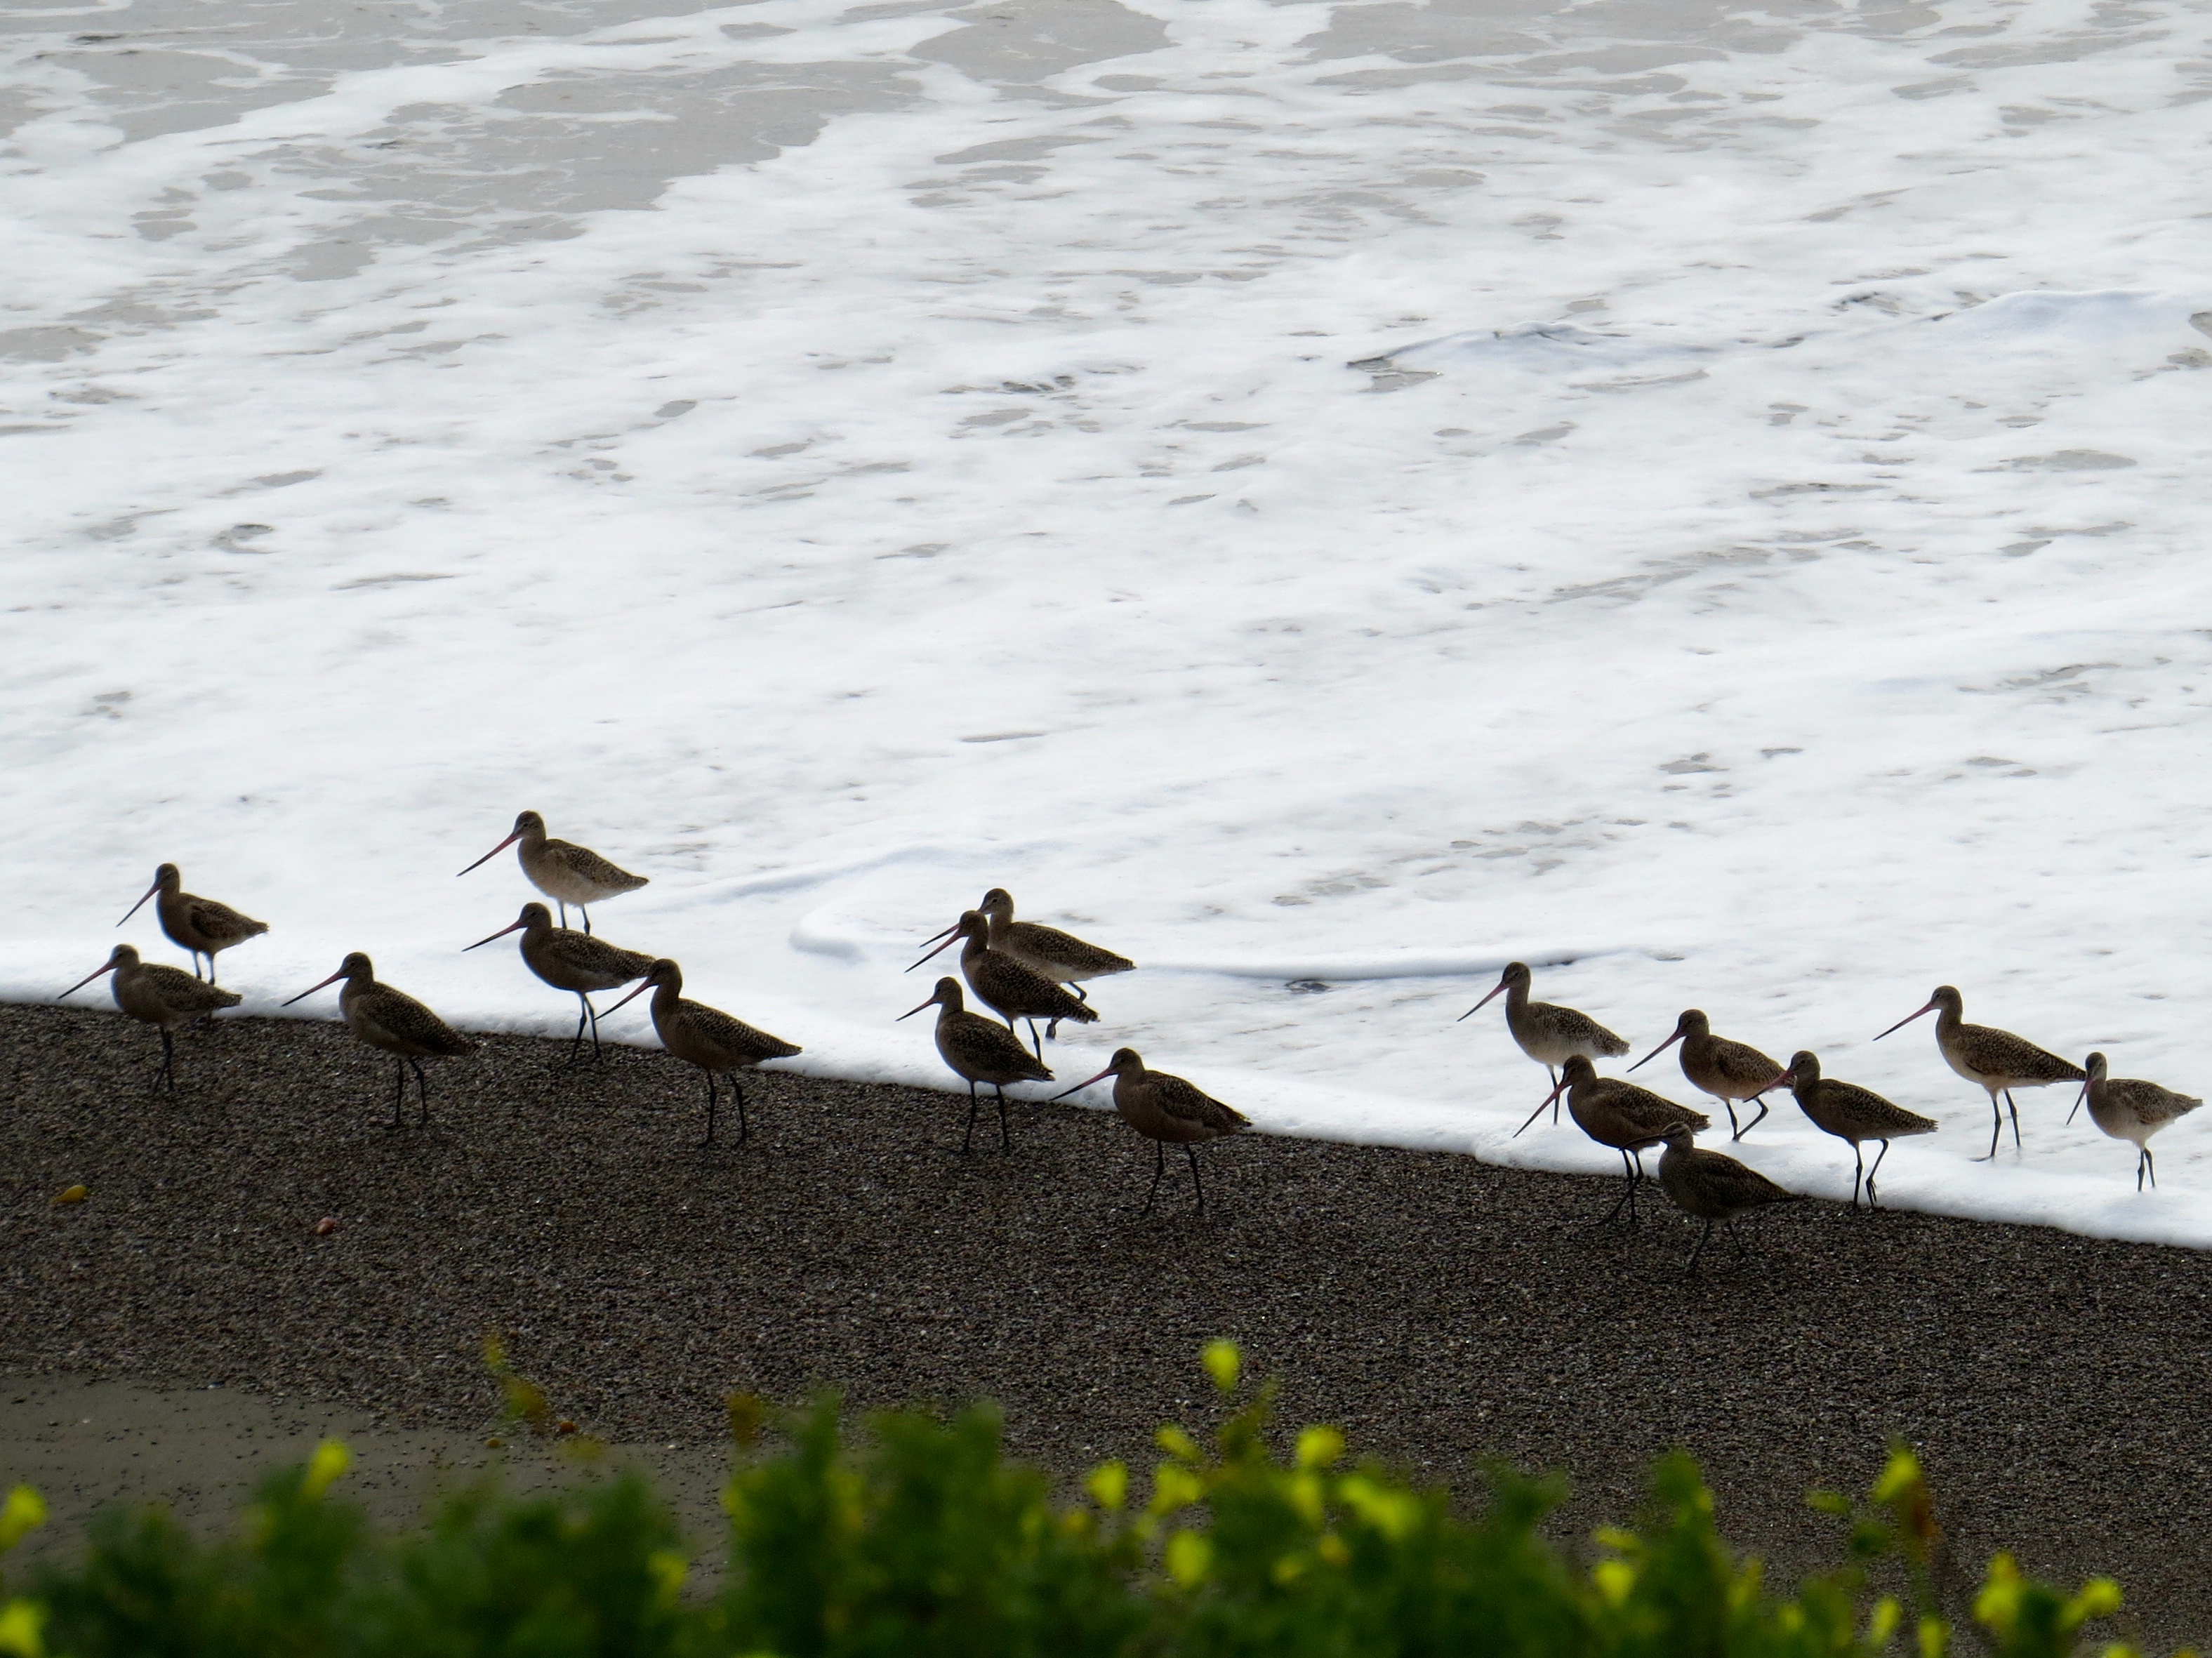 These shorebirds are hunkering down on a dark and gloomy Sunday.